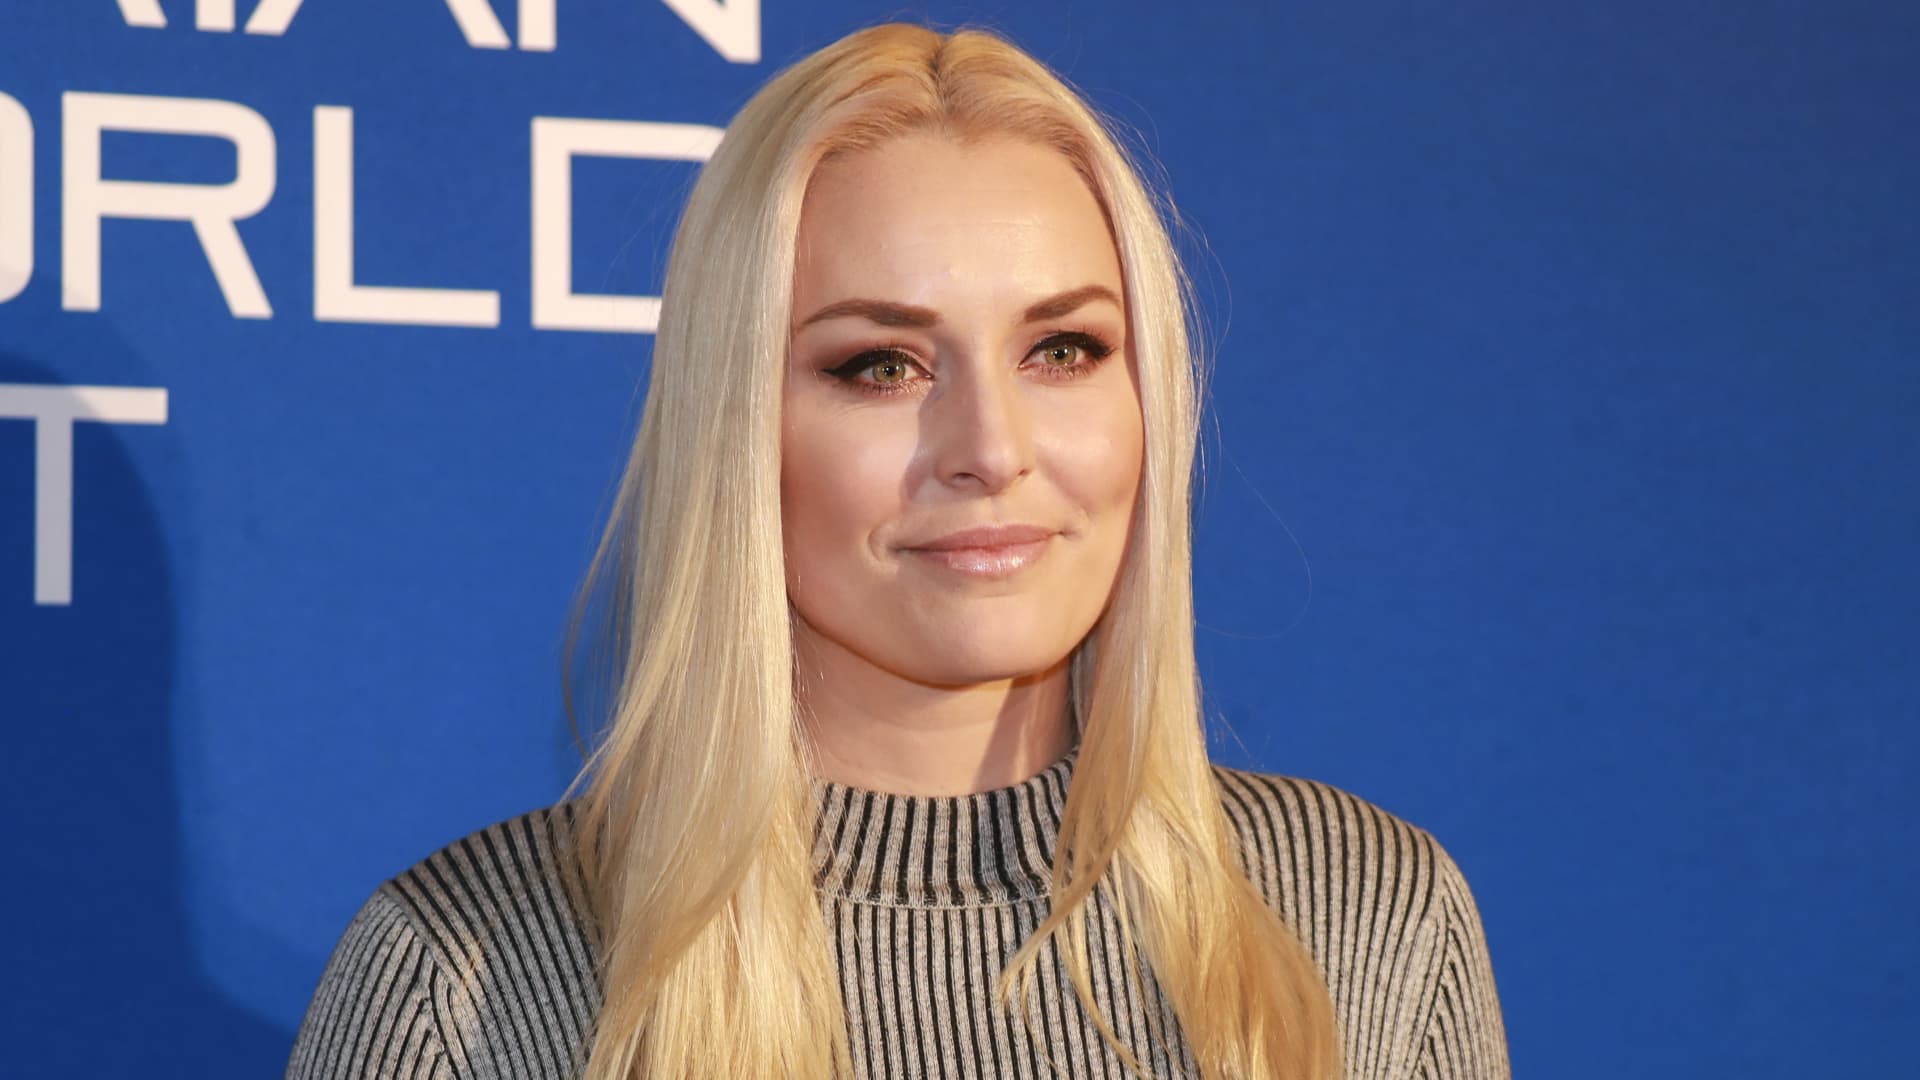 Lindsey Vonn of United States of America during the Climate Austrian World Summit on Hahnenkamm Race Weekend on January 23, 2020 in Kitzbuehel, Austria